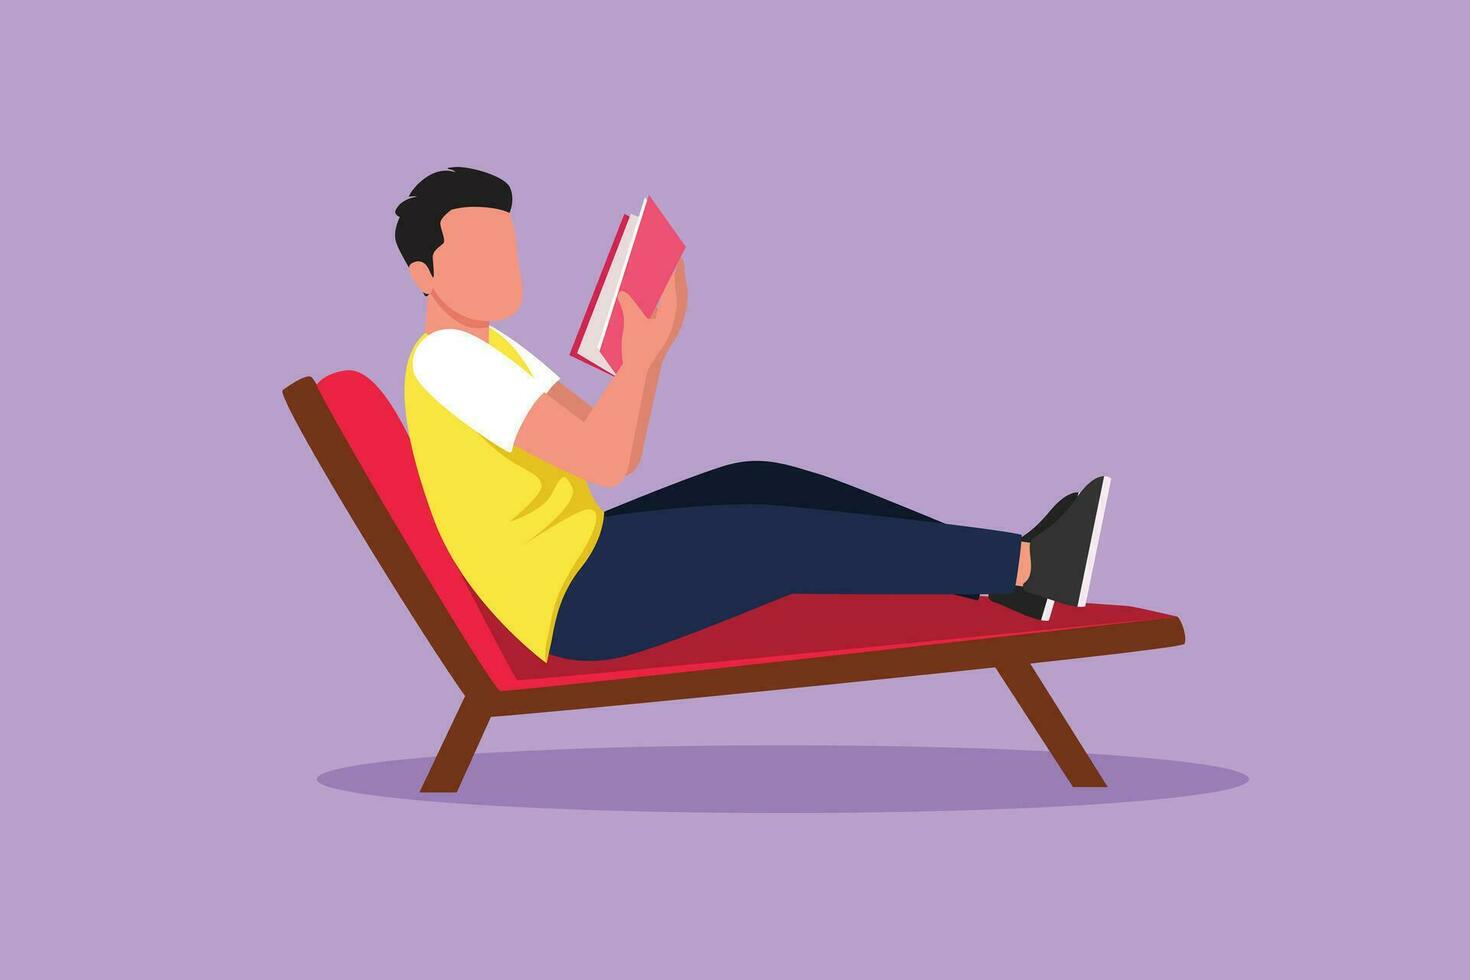 Graphic flat design drawing of reclined man reading book in lounge chair. Chill out time with good story concept. Smart male reader enjoying literature or studying. Cartoon style vector illustration